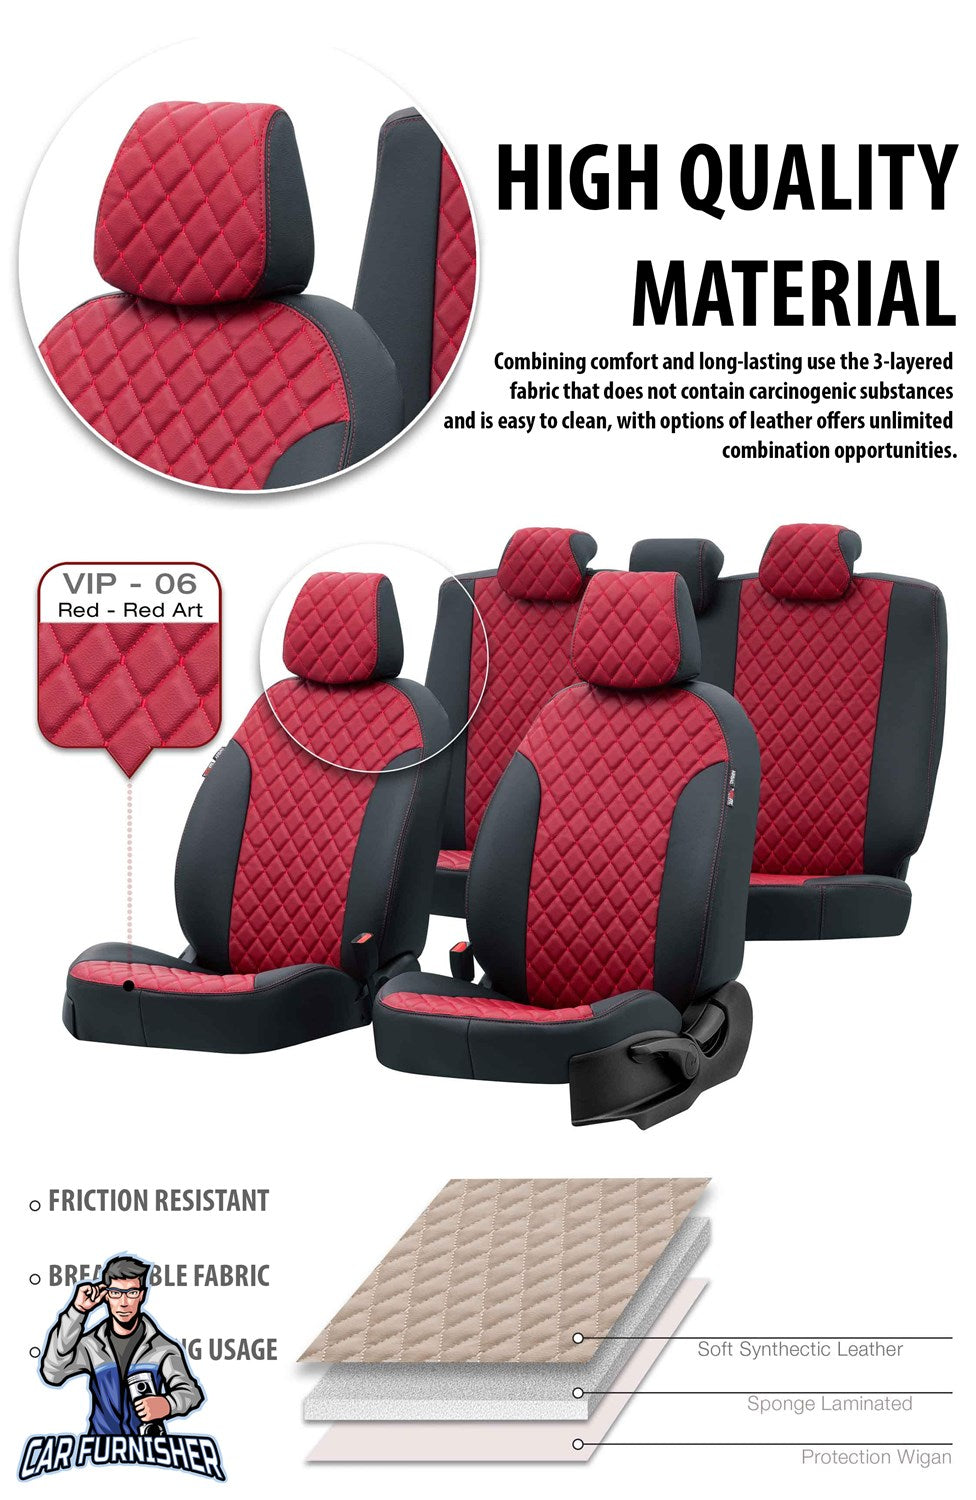 Seat Cordoba Seat Covers Madrid Leather Design Dark Red Leather